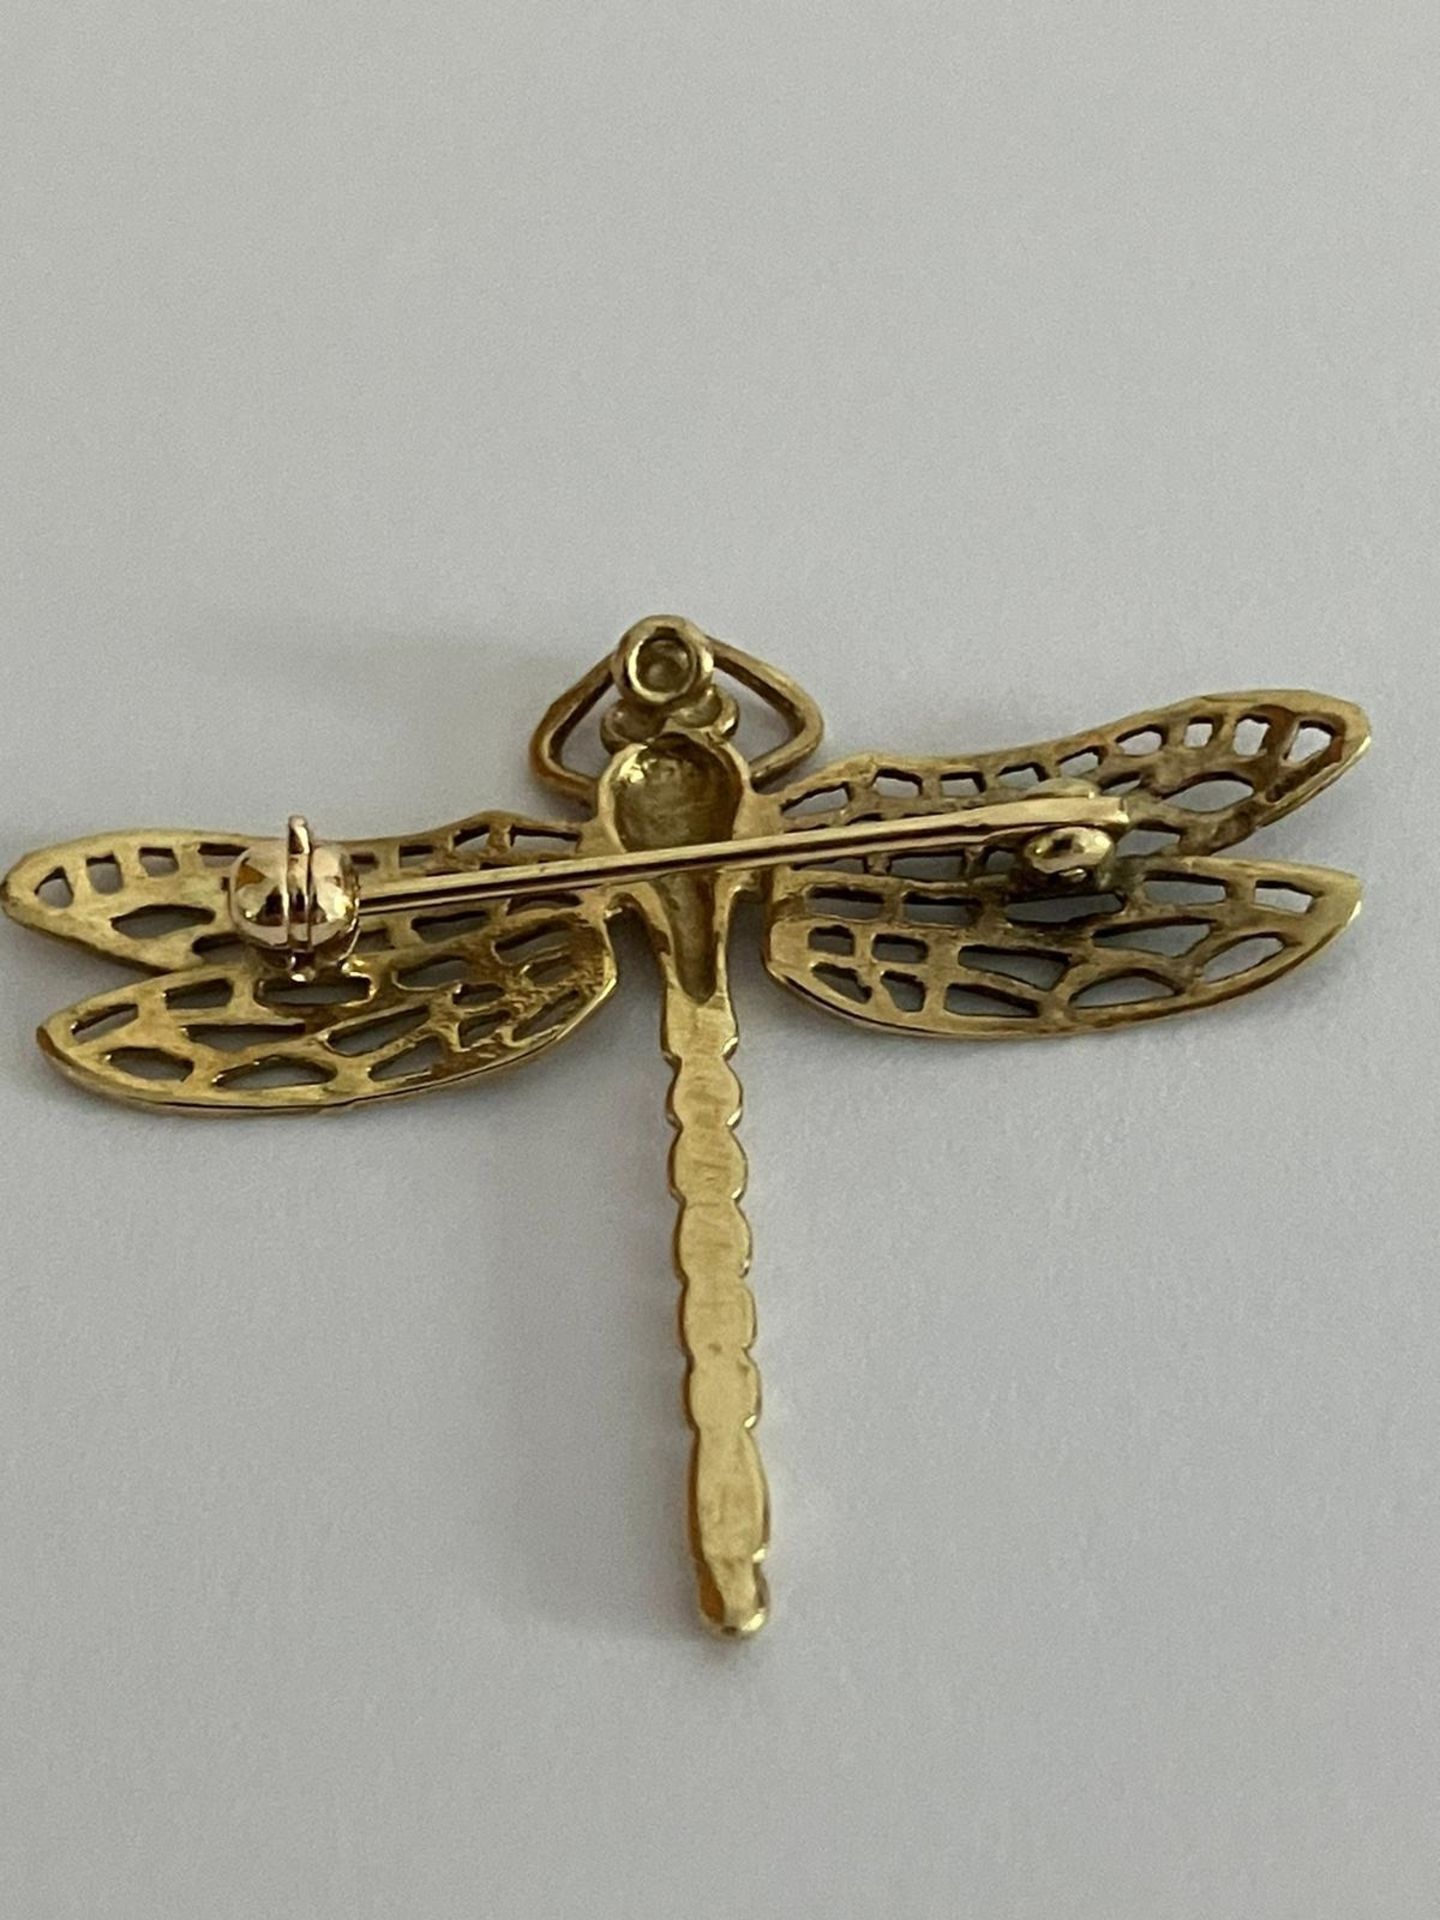 9 carat YELLOW GOLD FIREFLY BROOCH Having beautiful filigree wings complete with full UK hallmark. - Image 2 of 5